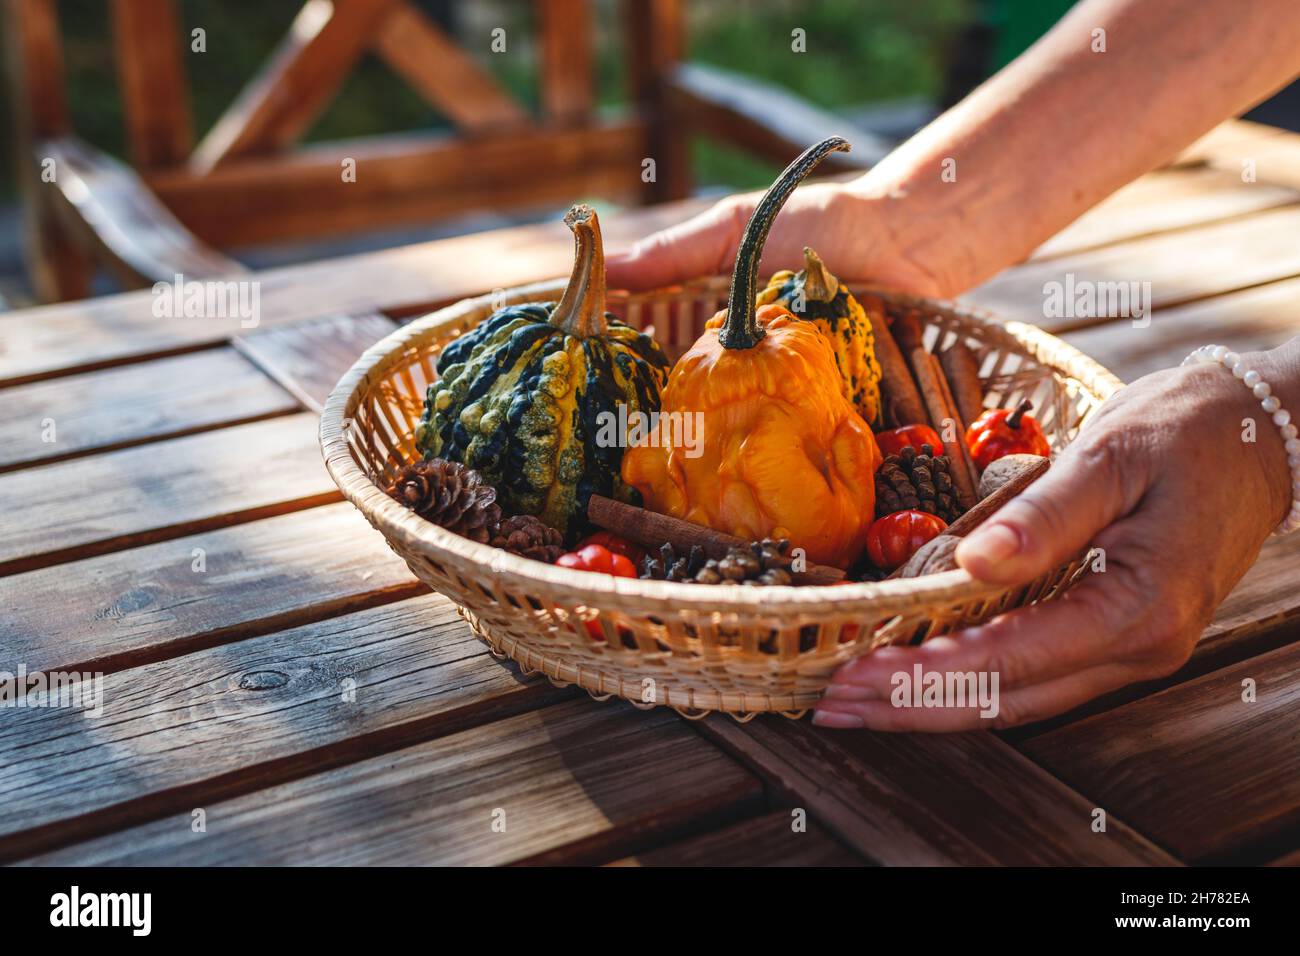 Woman decorating wooden table with pumpkins, cones and other decoration in wicker basket. Preparing table for Thanksgiving dinner in garden Stock Photo